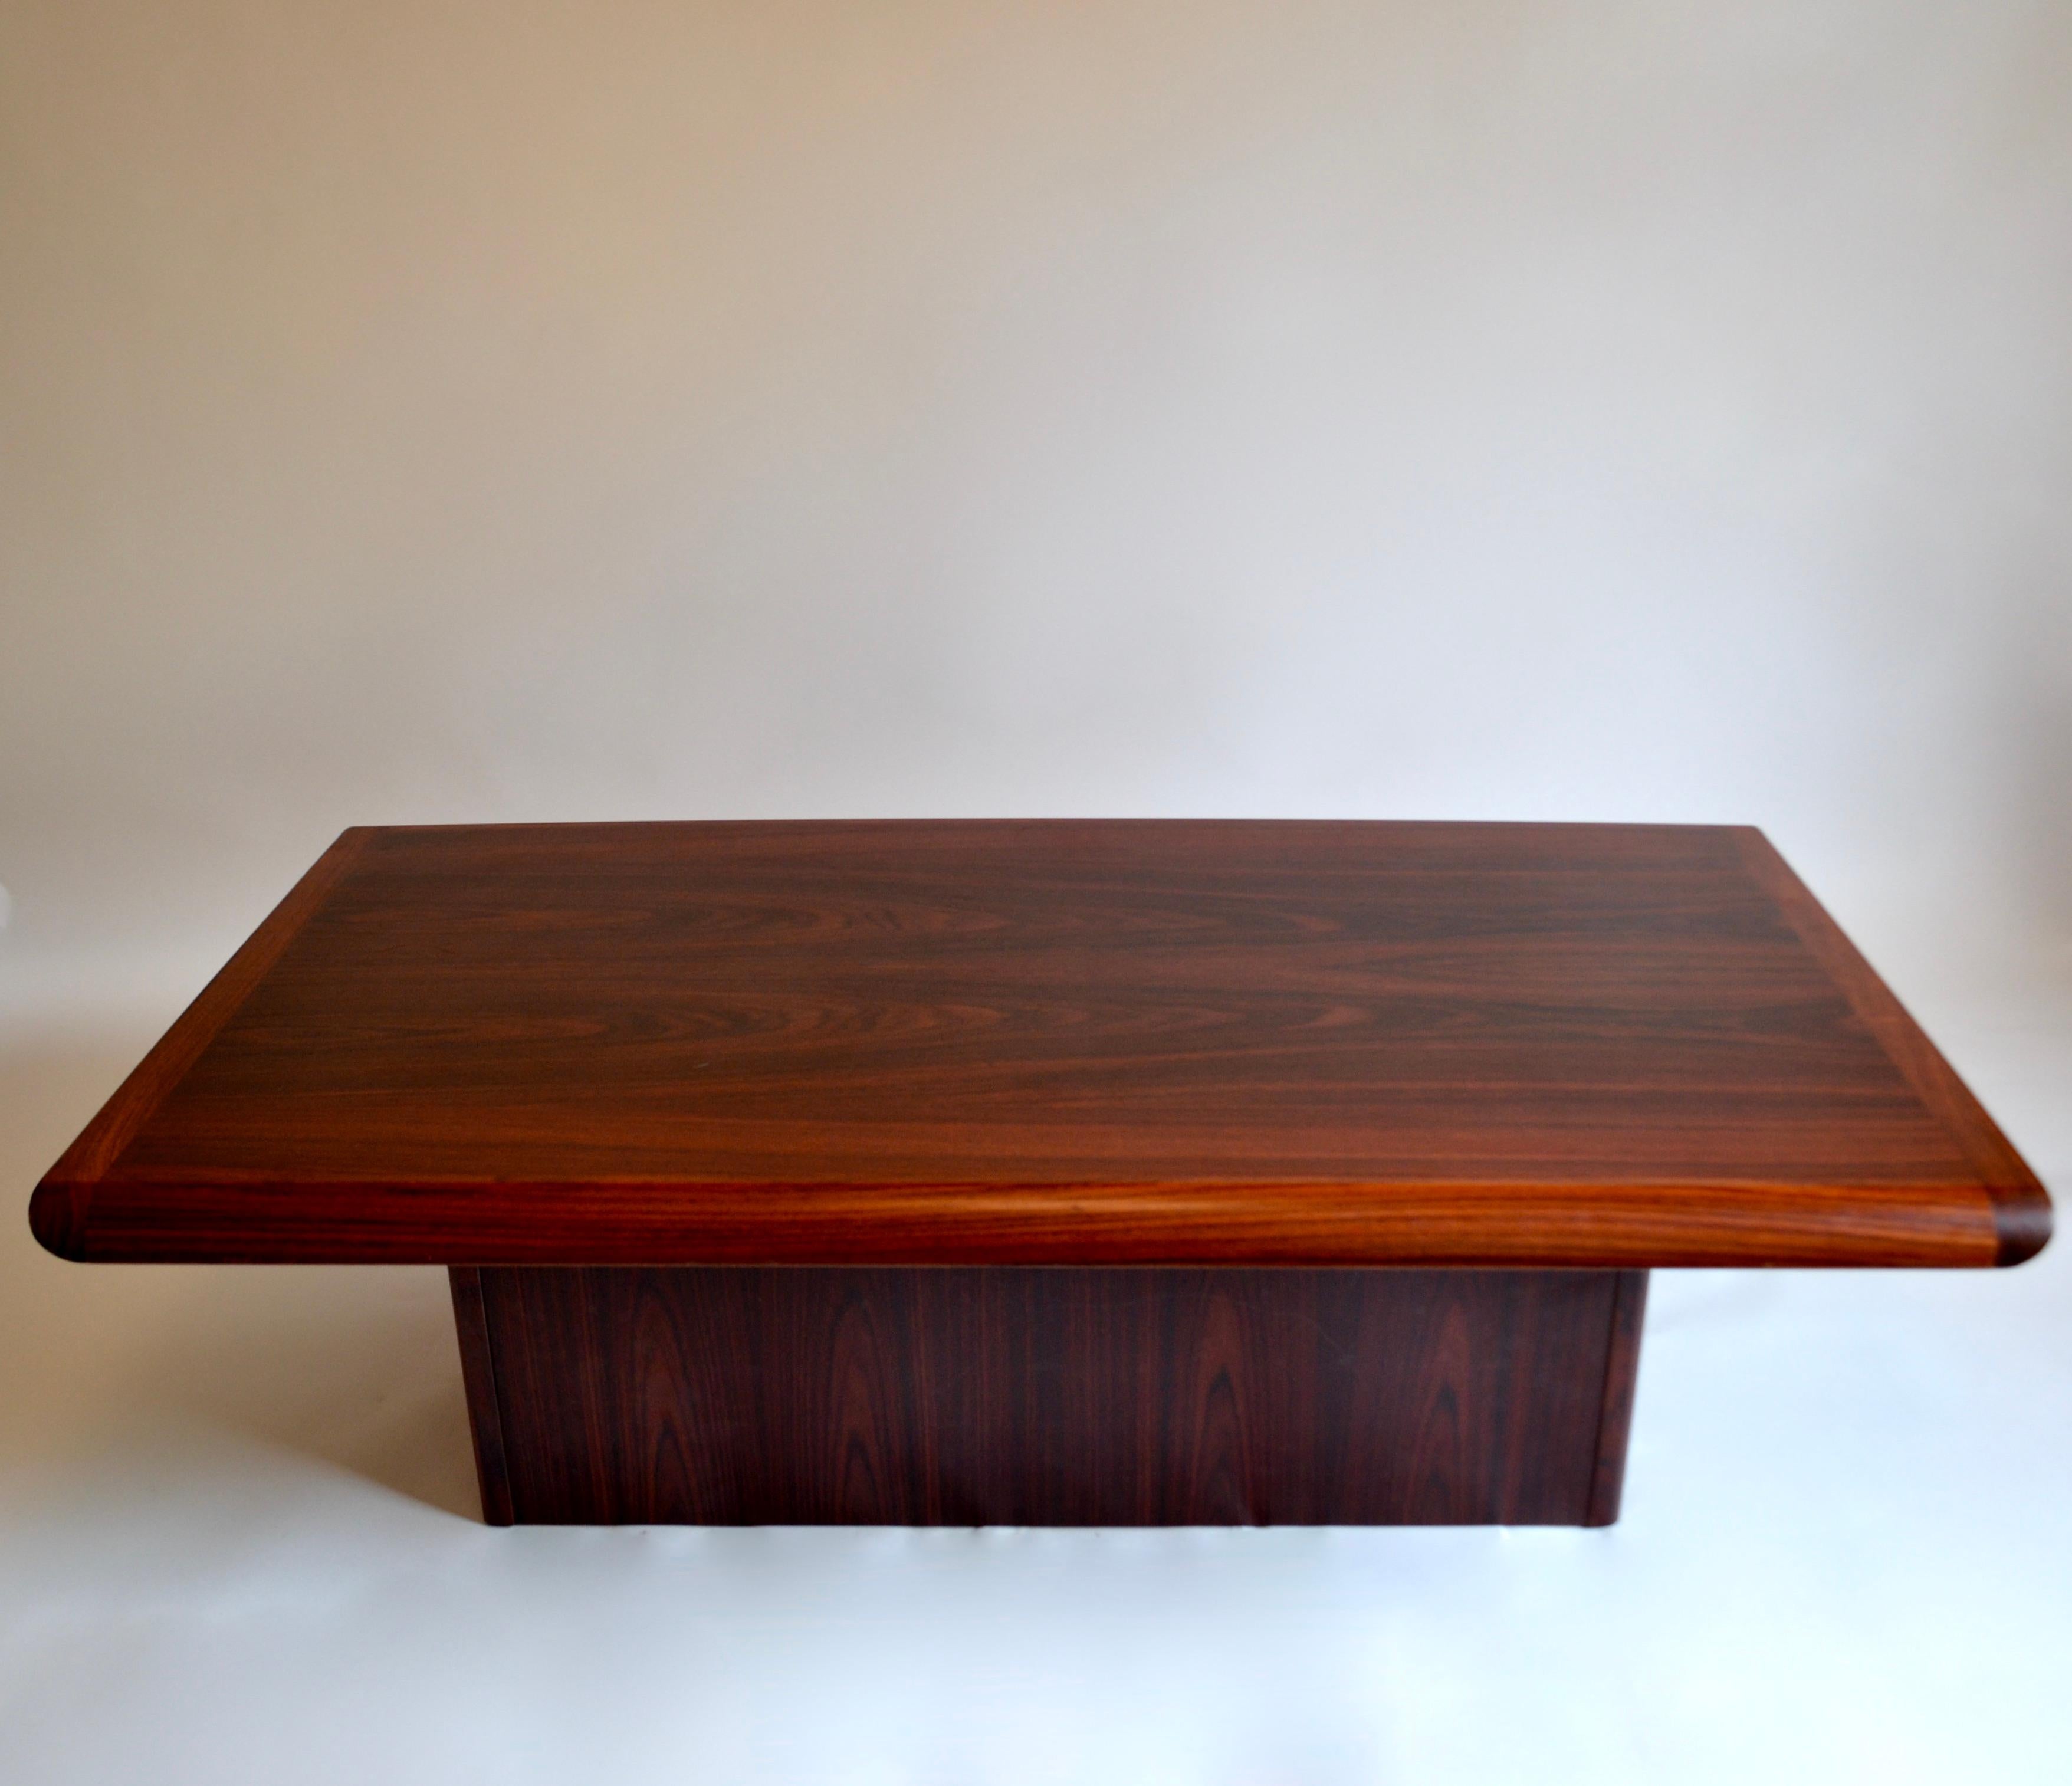 1960s rosewood pedestal coffee table of a rectangular shape designed and made in Denmark by Vejle Stole & Møbelfabrik. Makers stamp on underside of table.